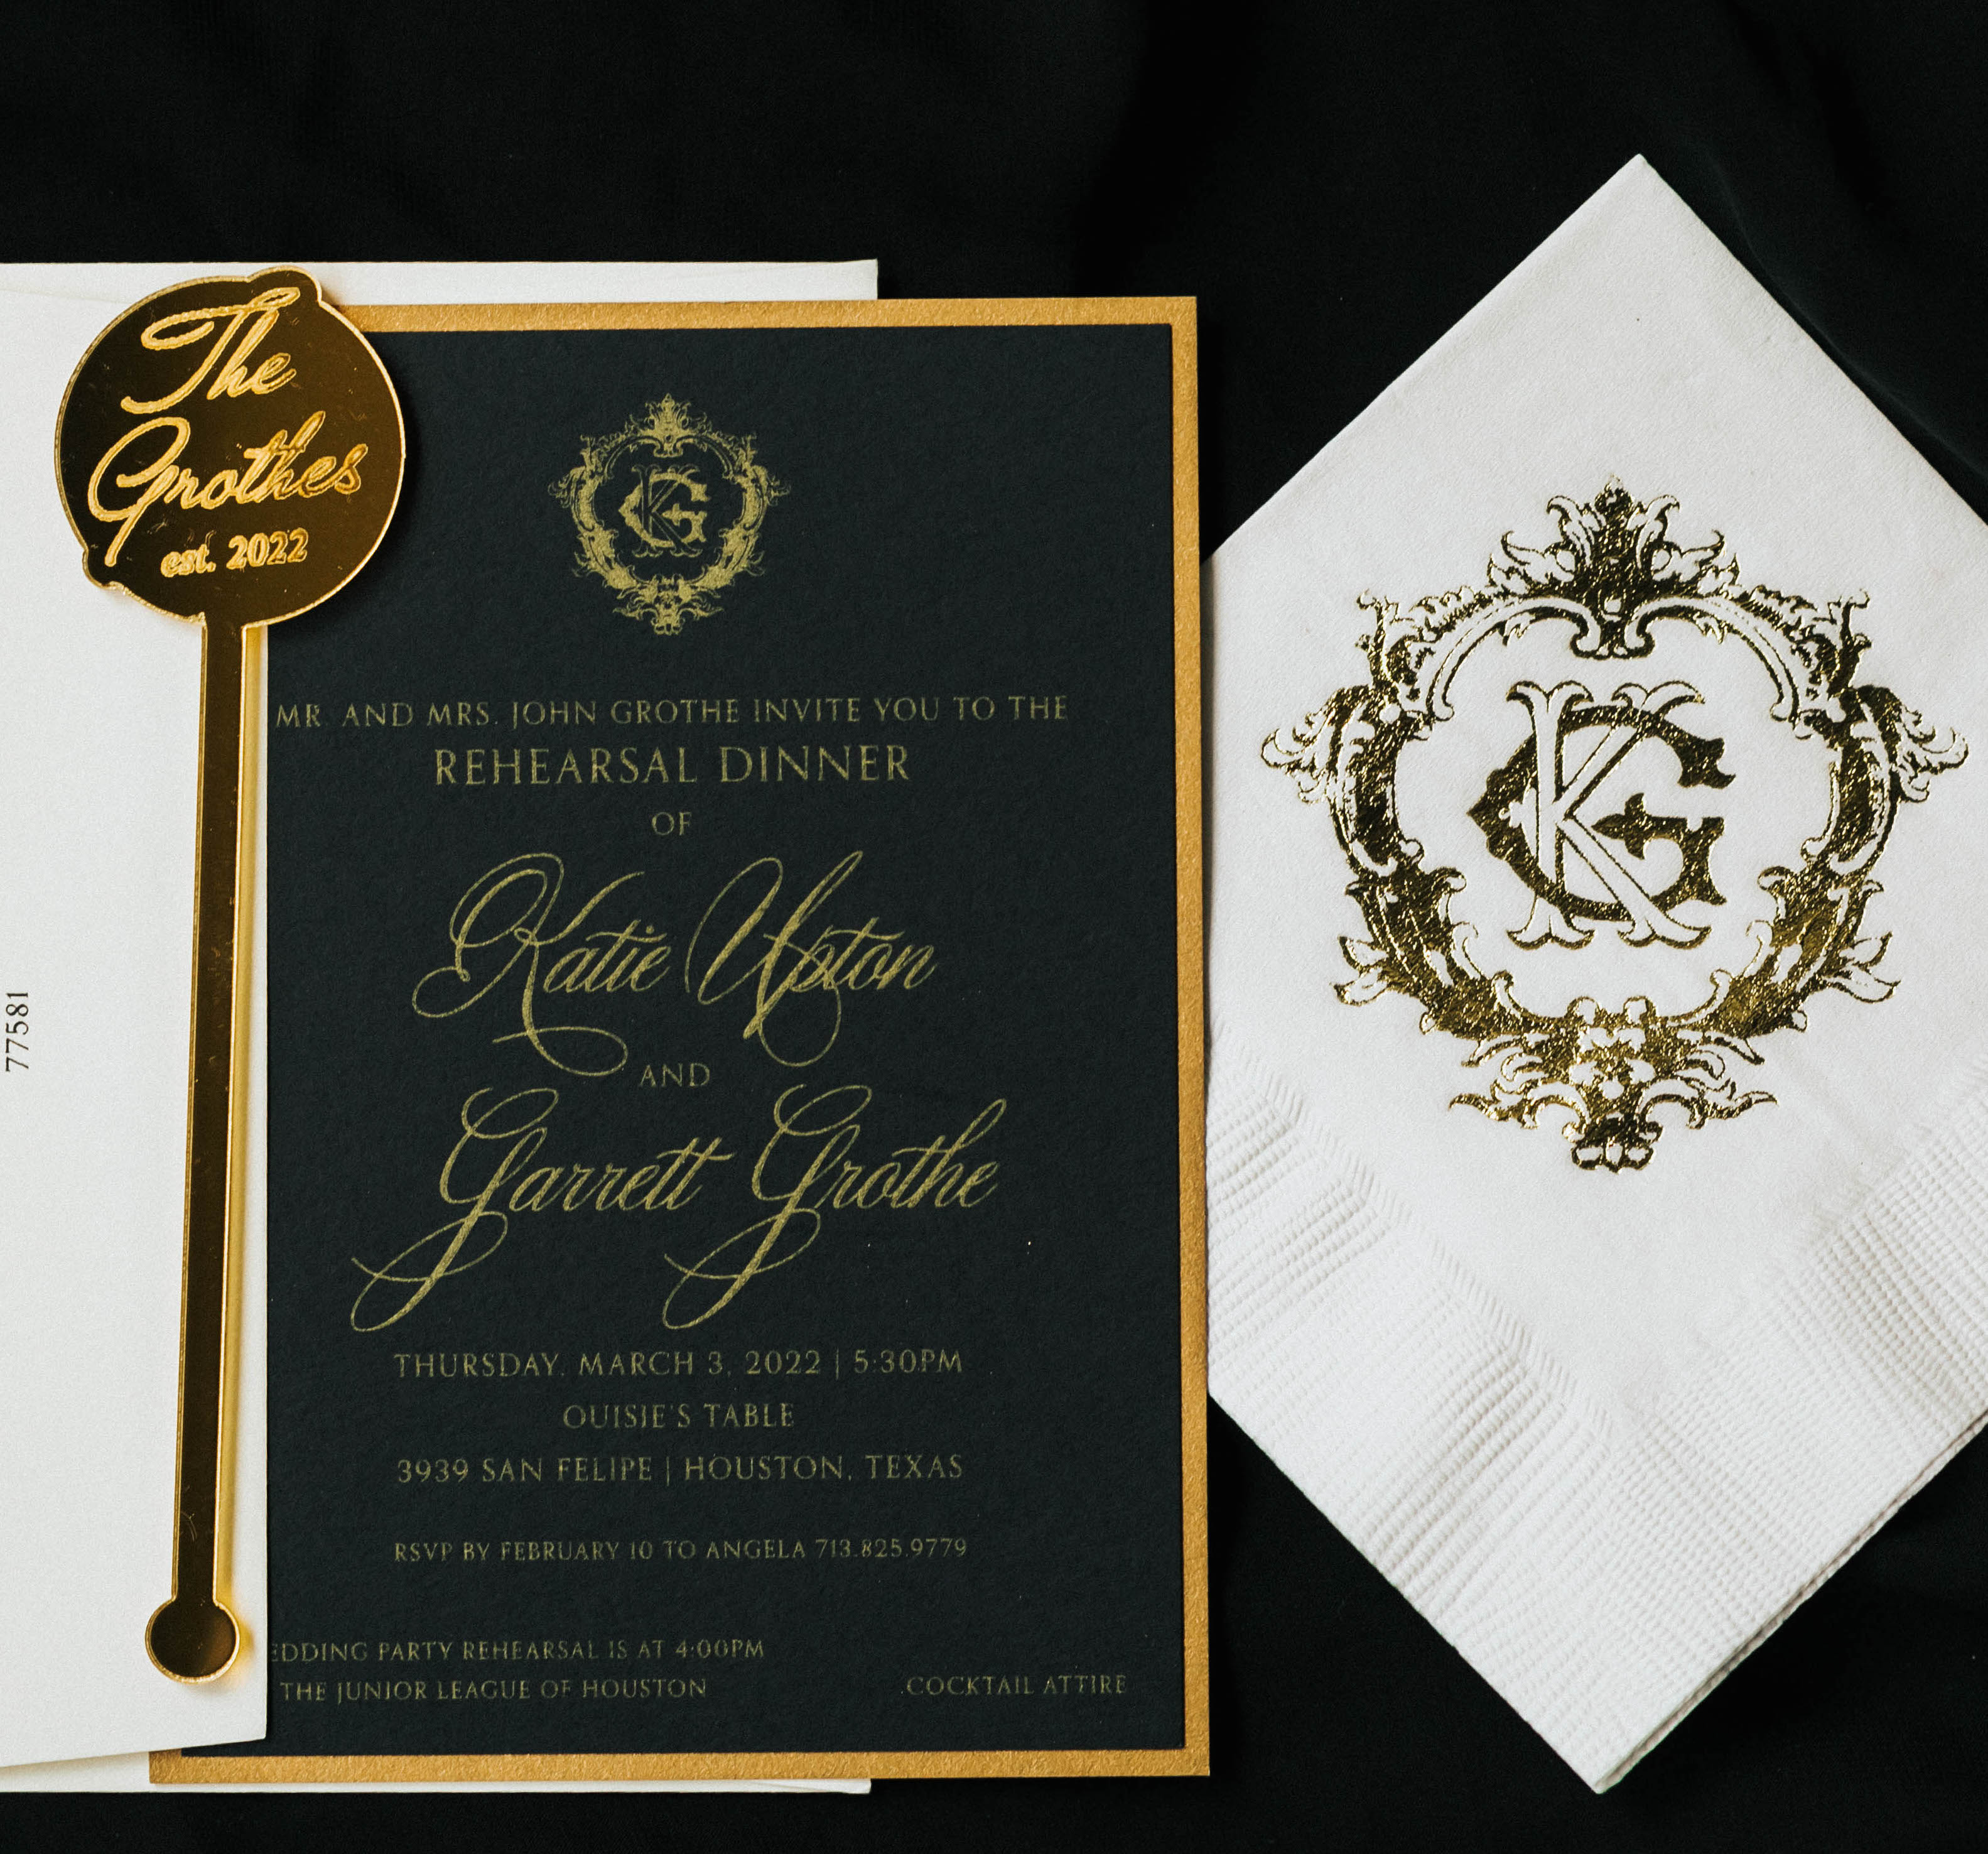 A black, white and gold wedding invitation suite for a bride and groom.